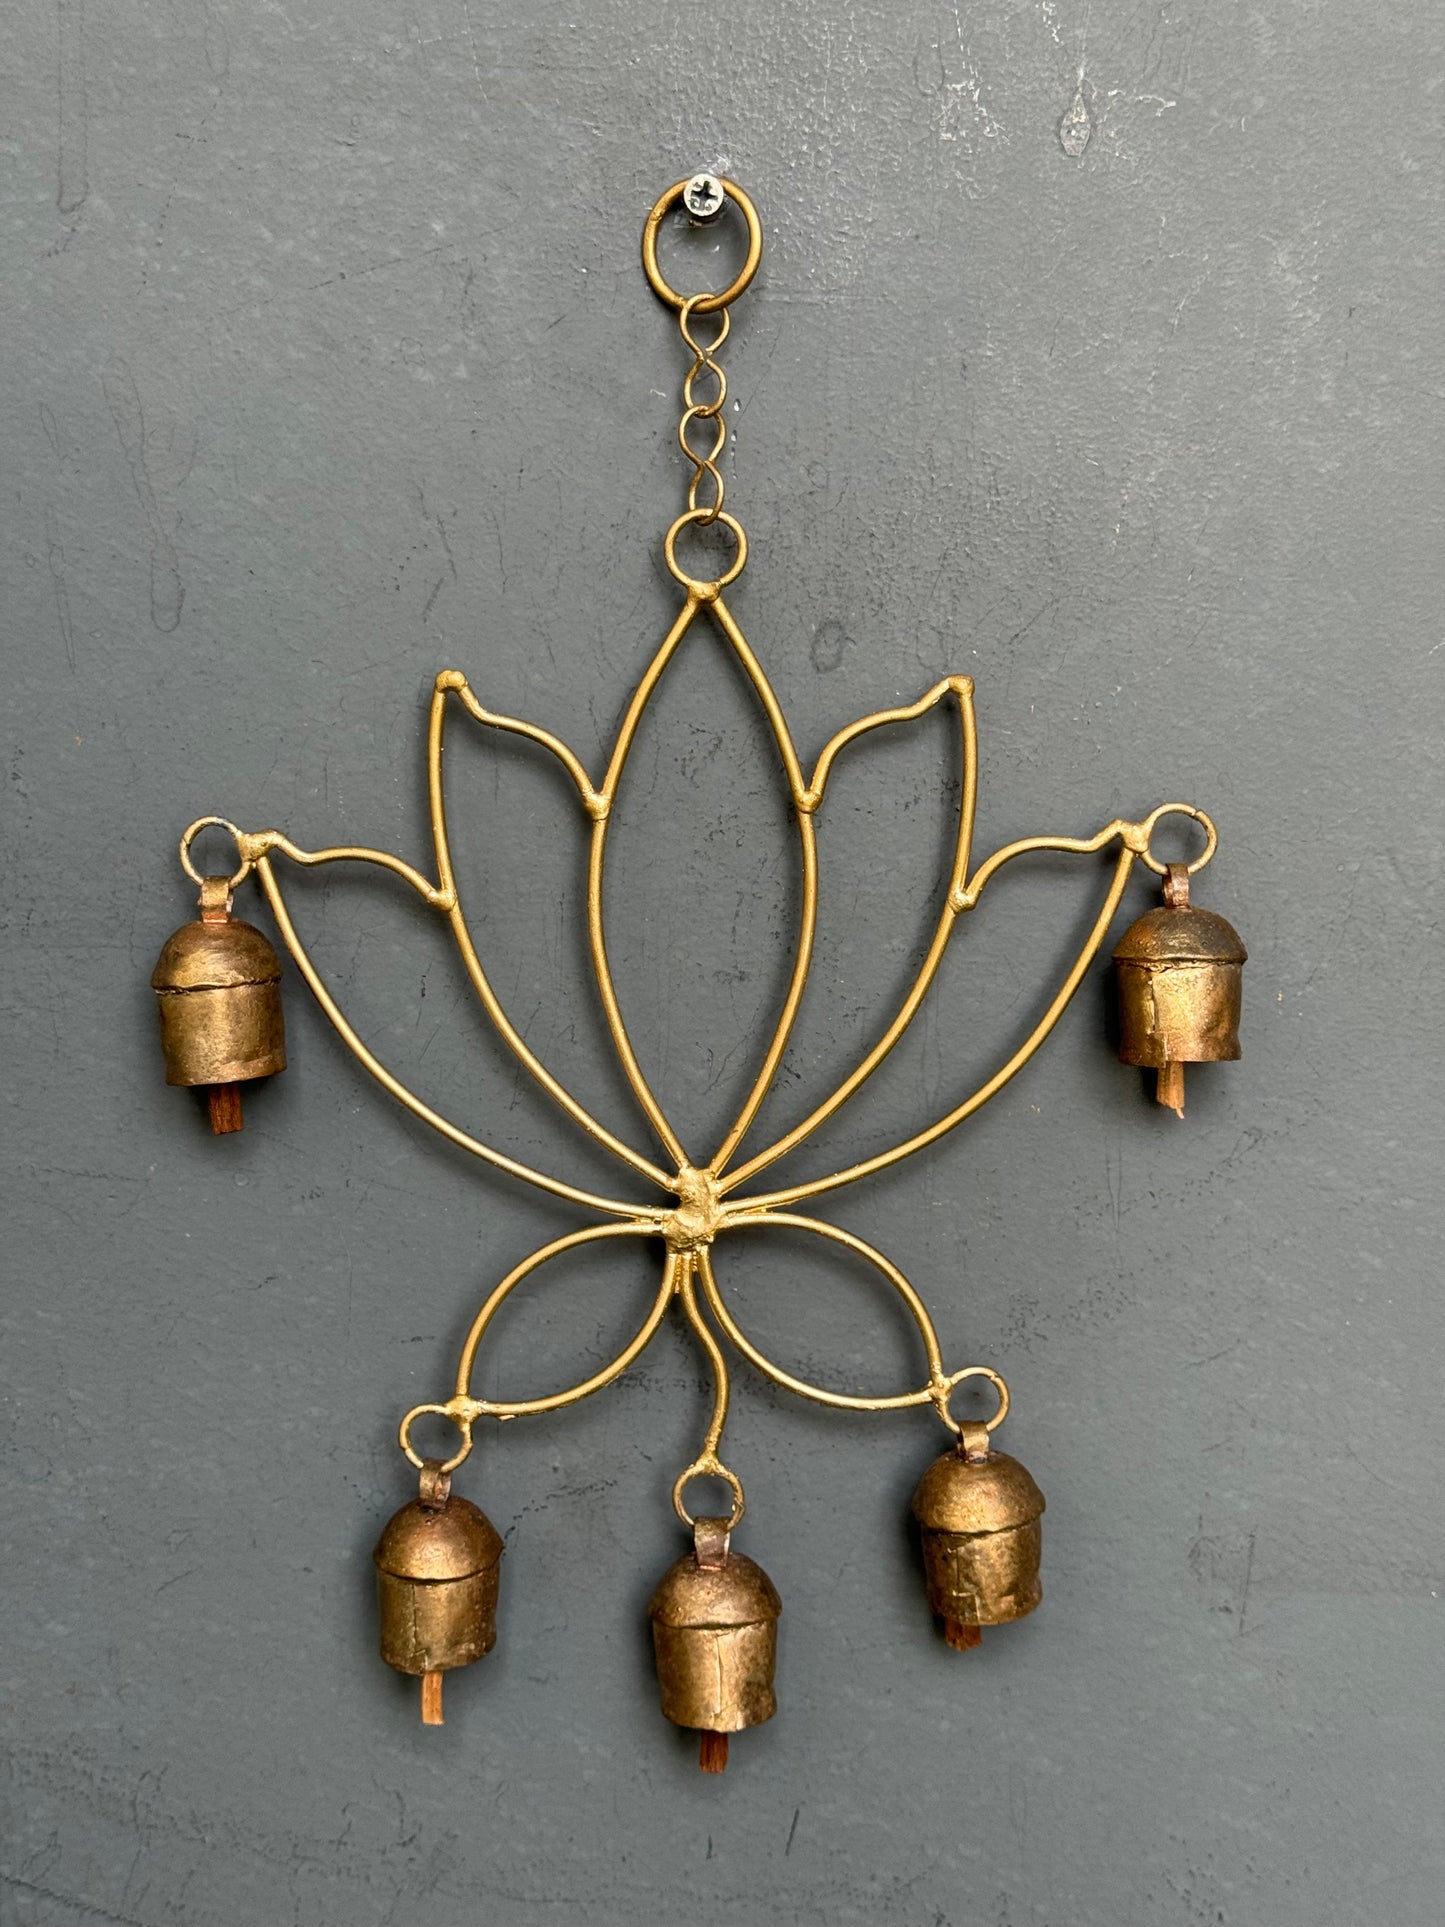 Lotus handcrafted copper bell hanging with 5 bells